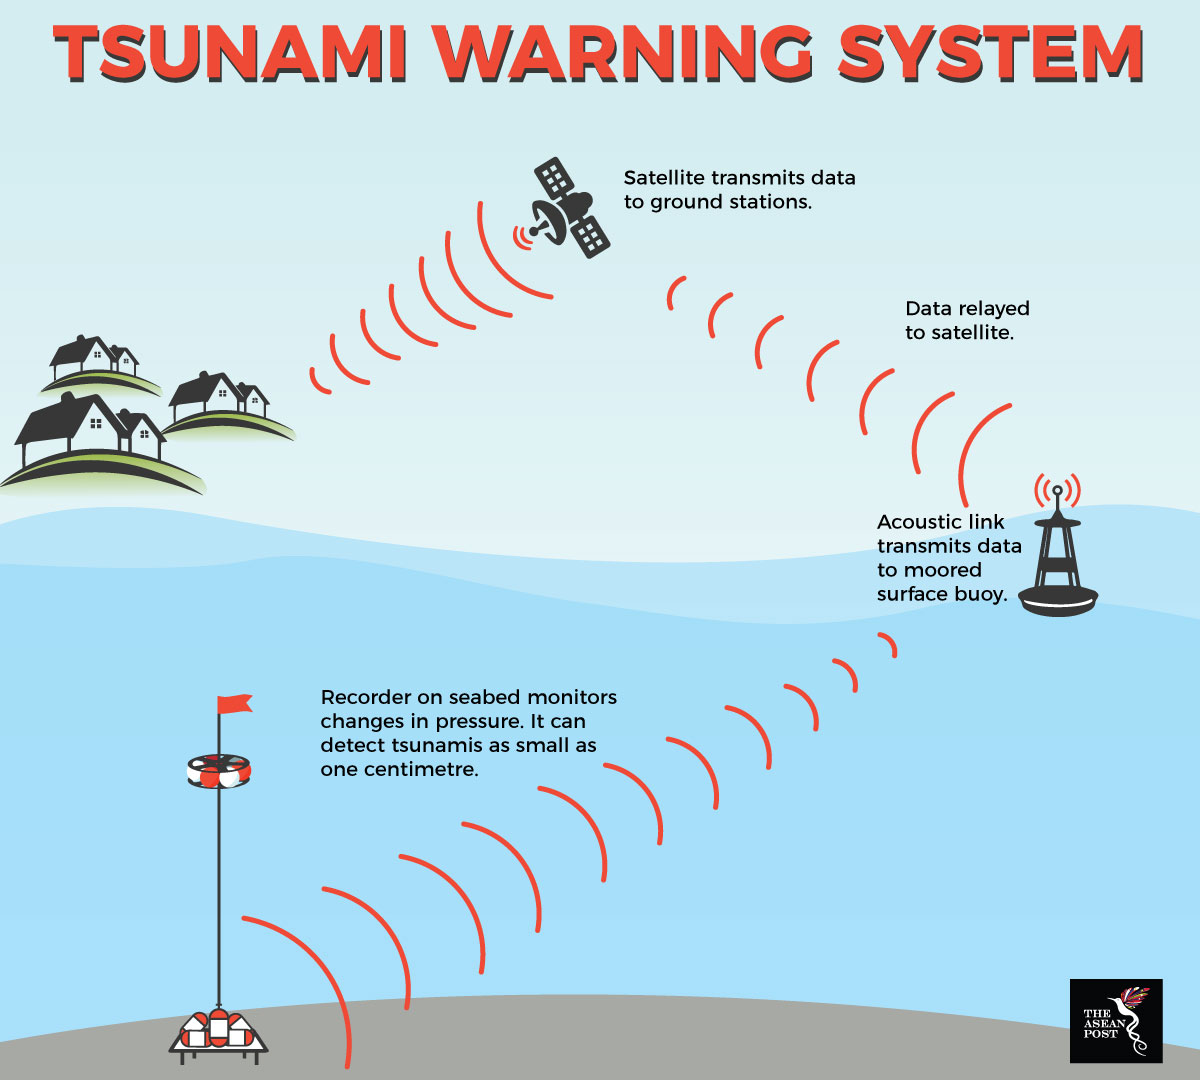 Natural Disaster Warning Systems - Images All Disaster ...